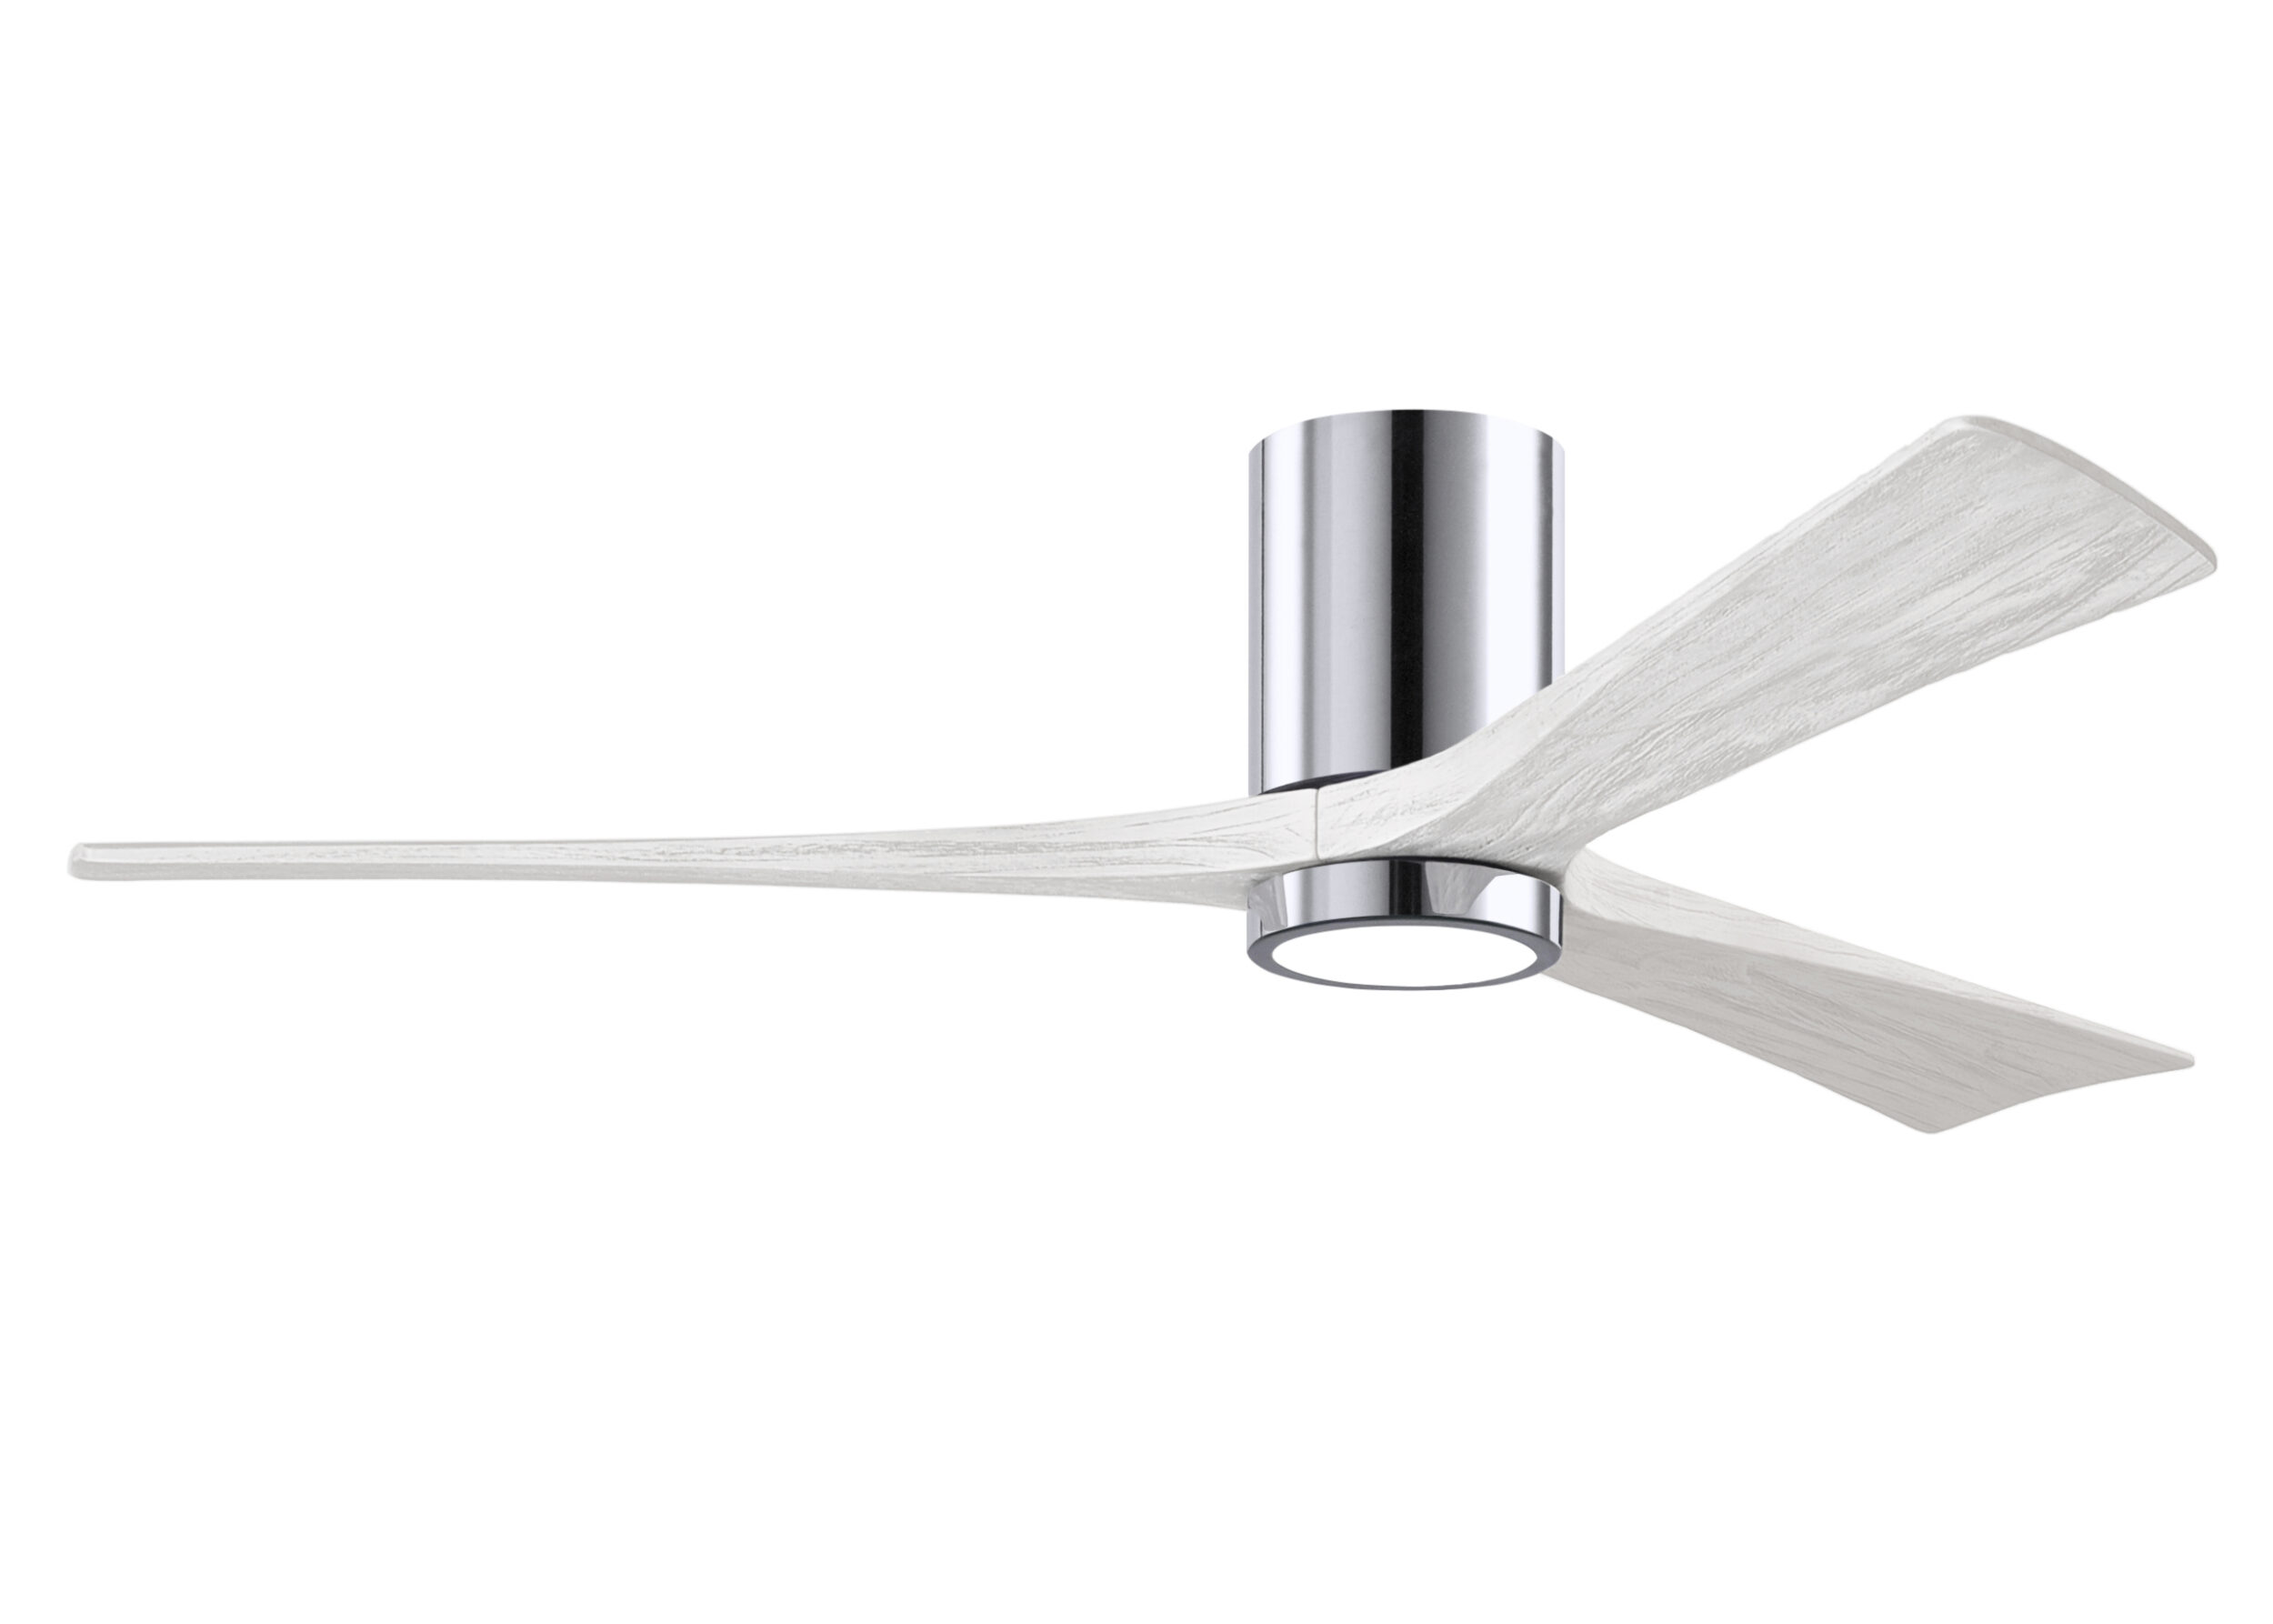 Irene-3HLK Ceiling Fan in Polished Chrome Finish with 60